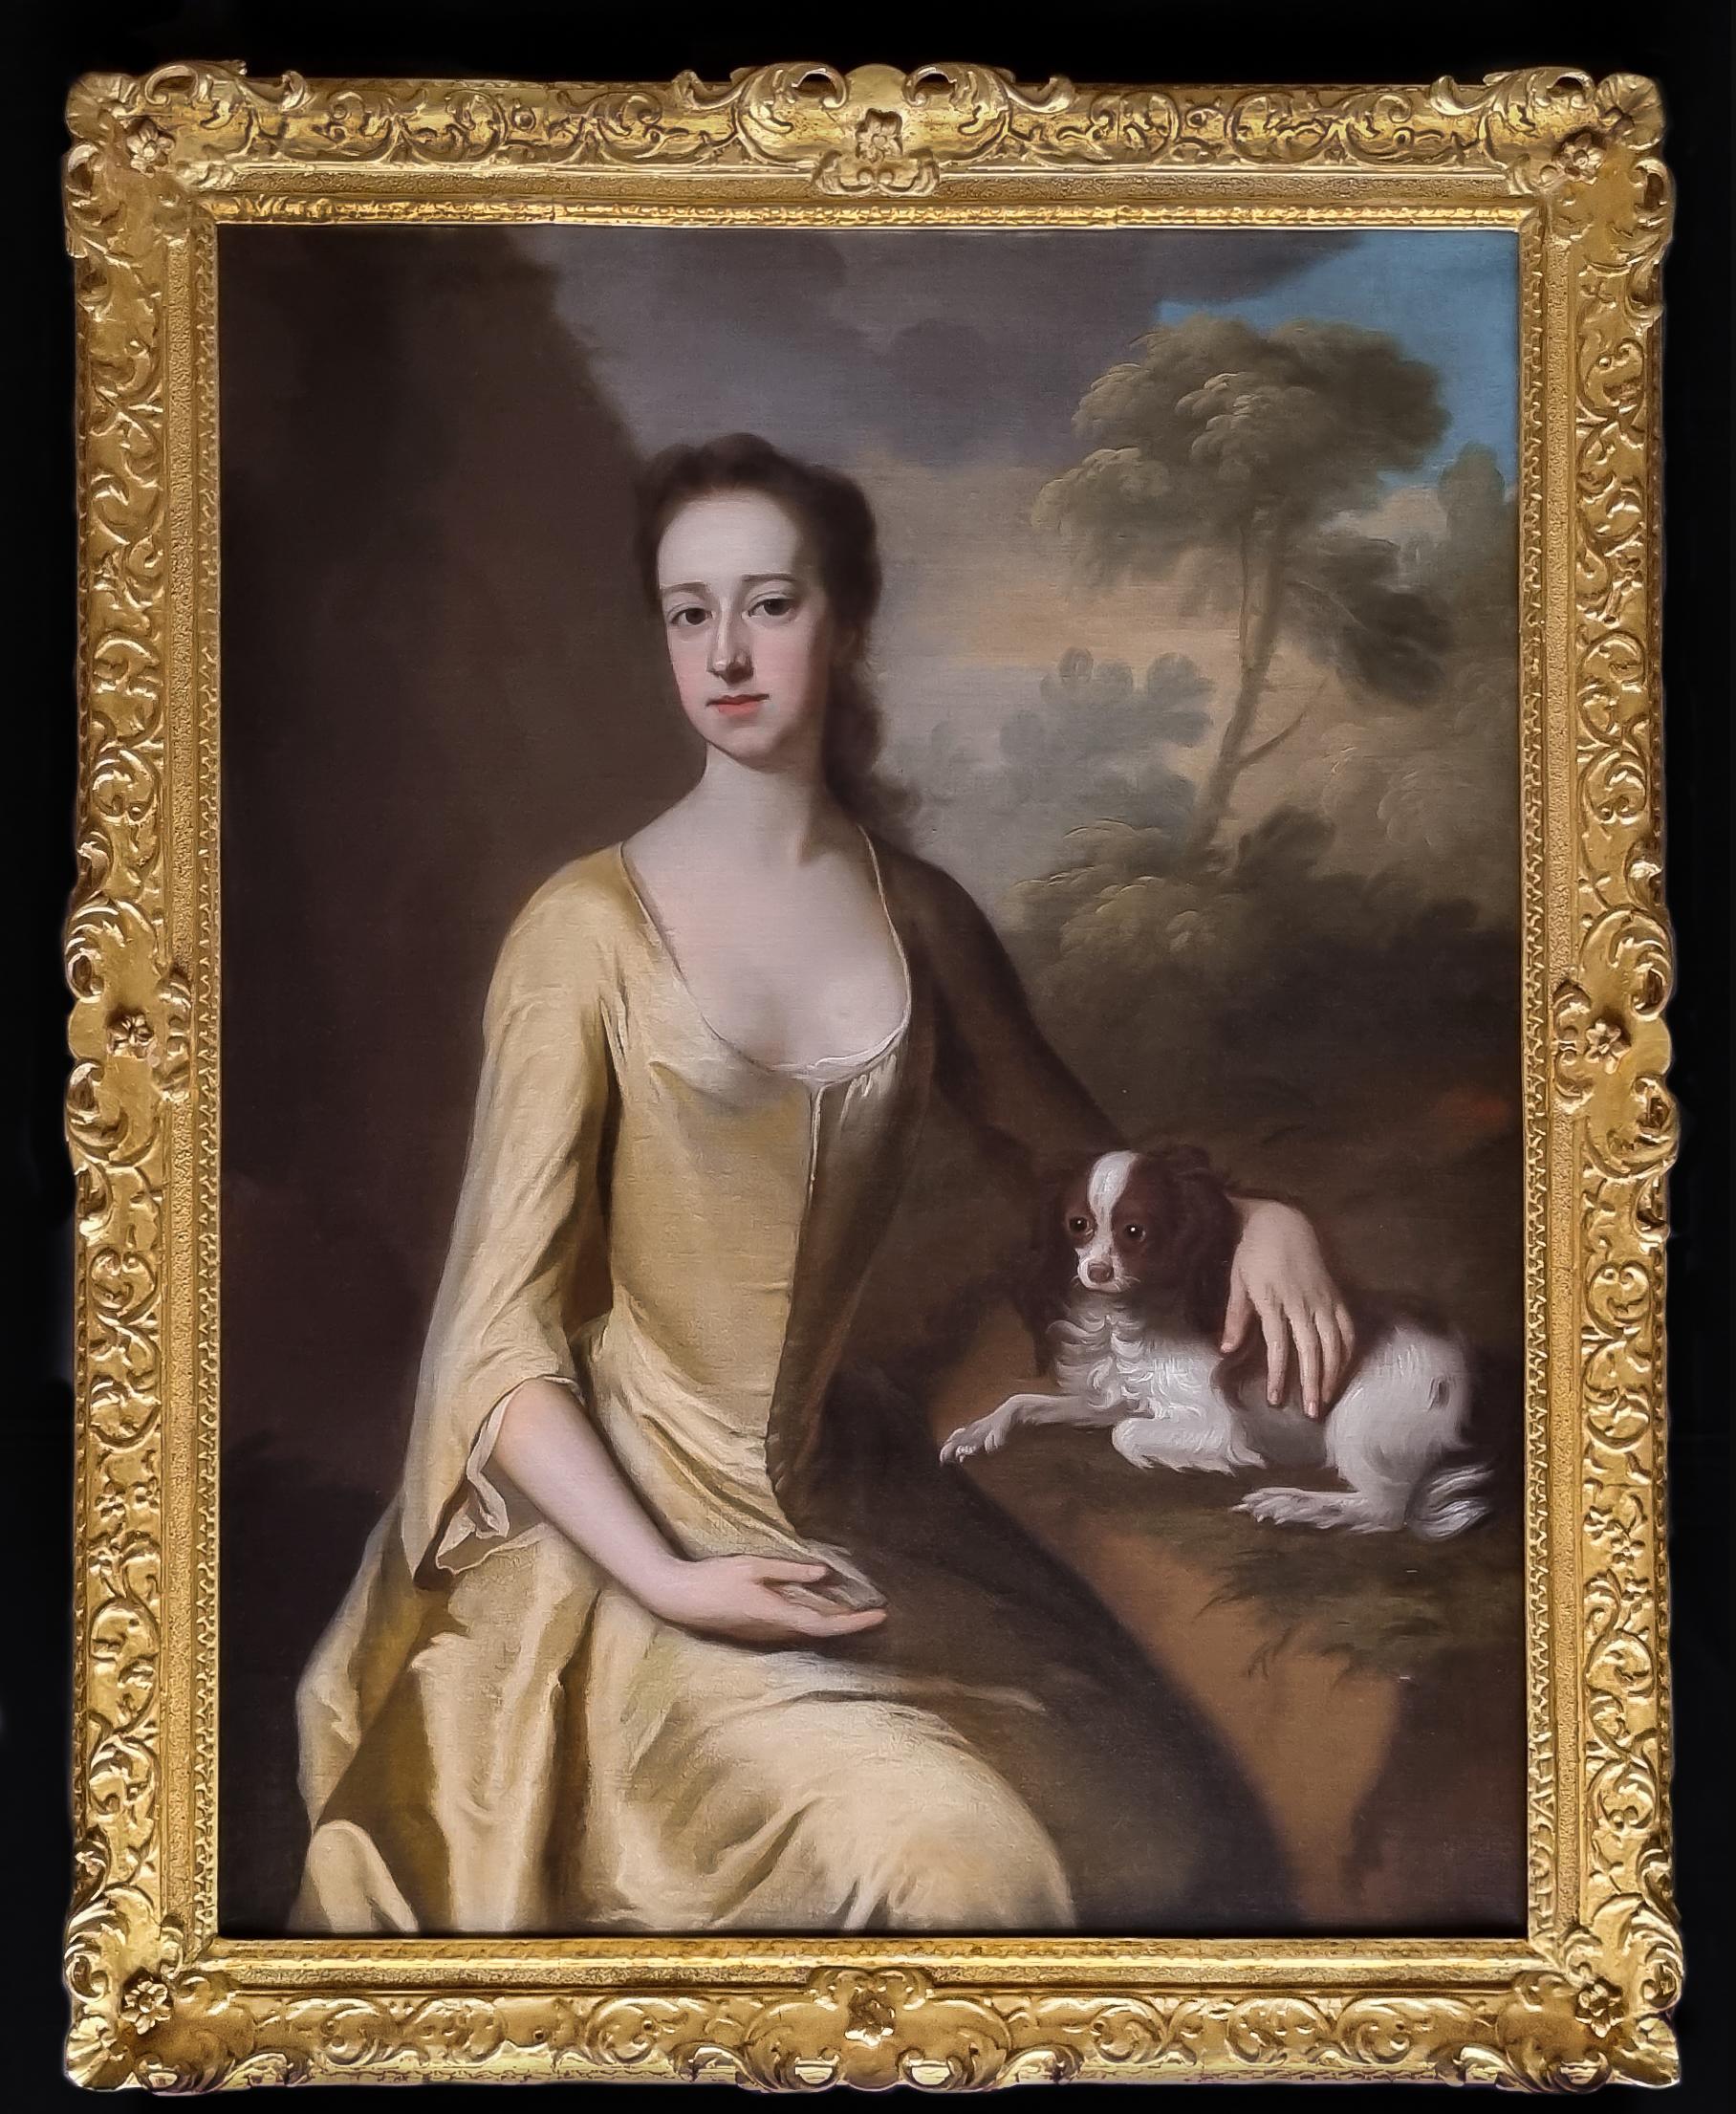 (Attributed to) Michael Dahl Portrait Painting - Portrait of Lady Mary Booth, later Countess of Stamford c.1720; Oil on Canvas